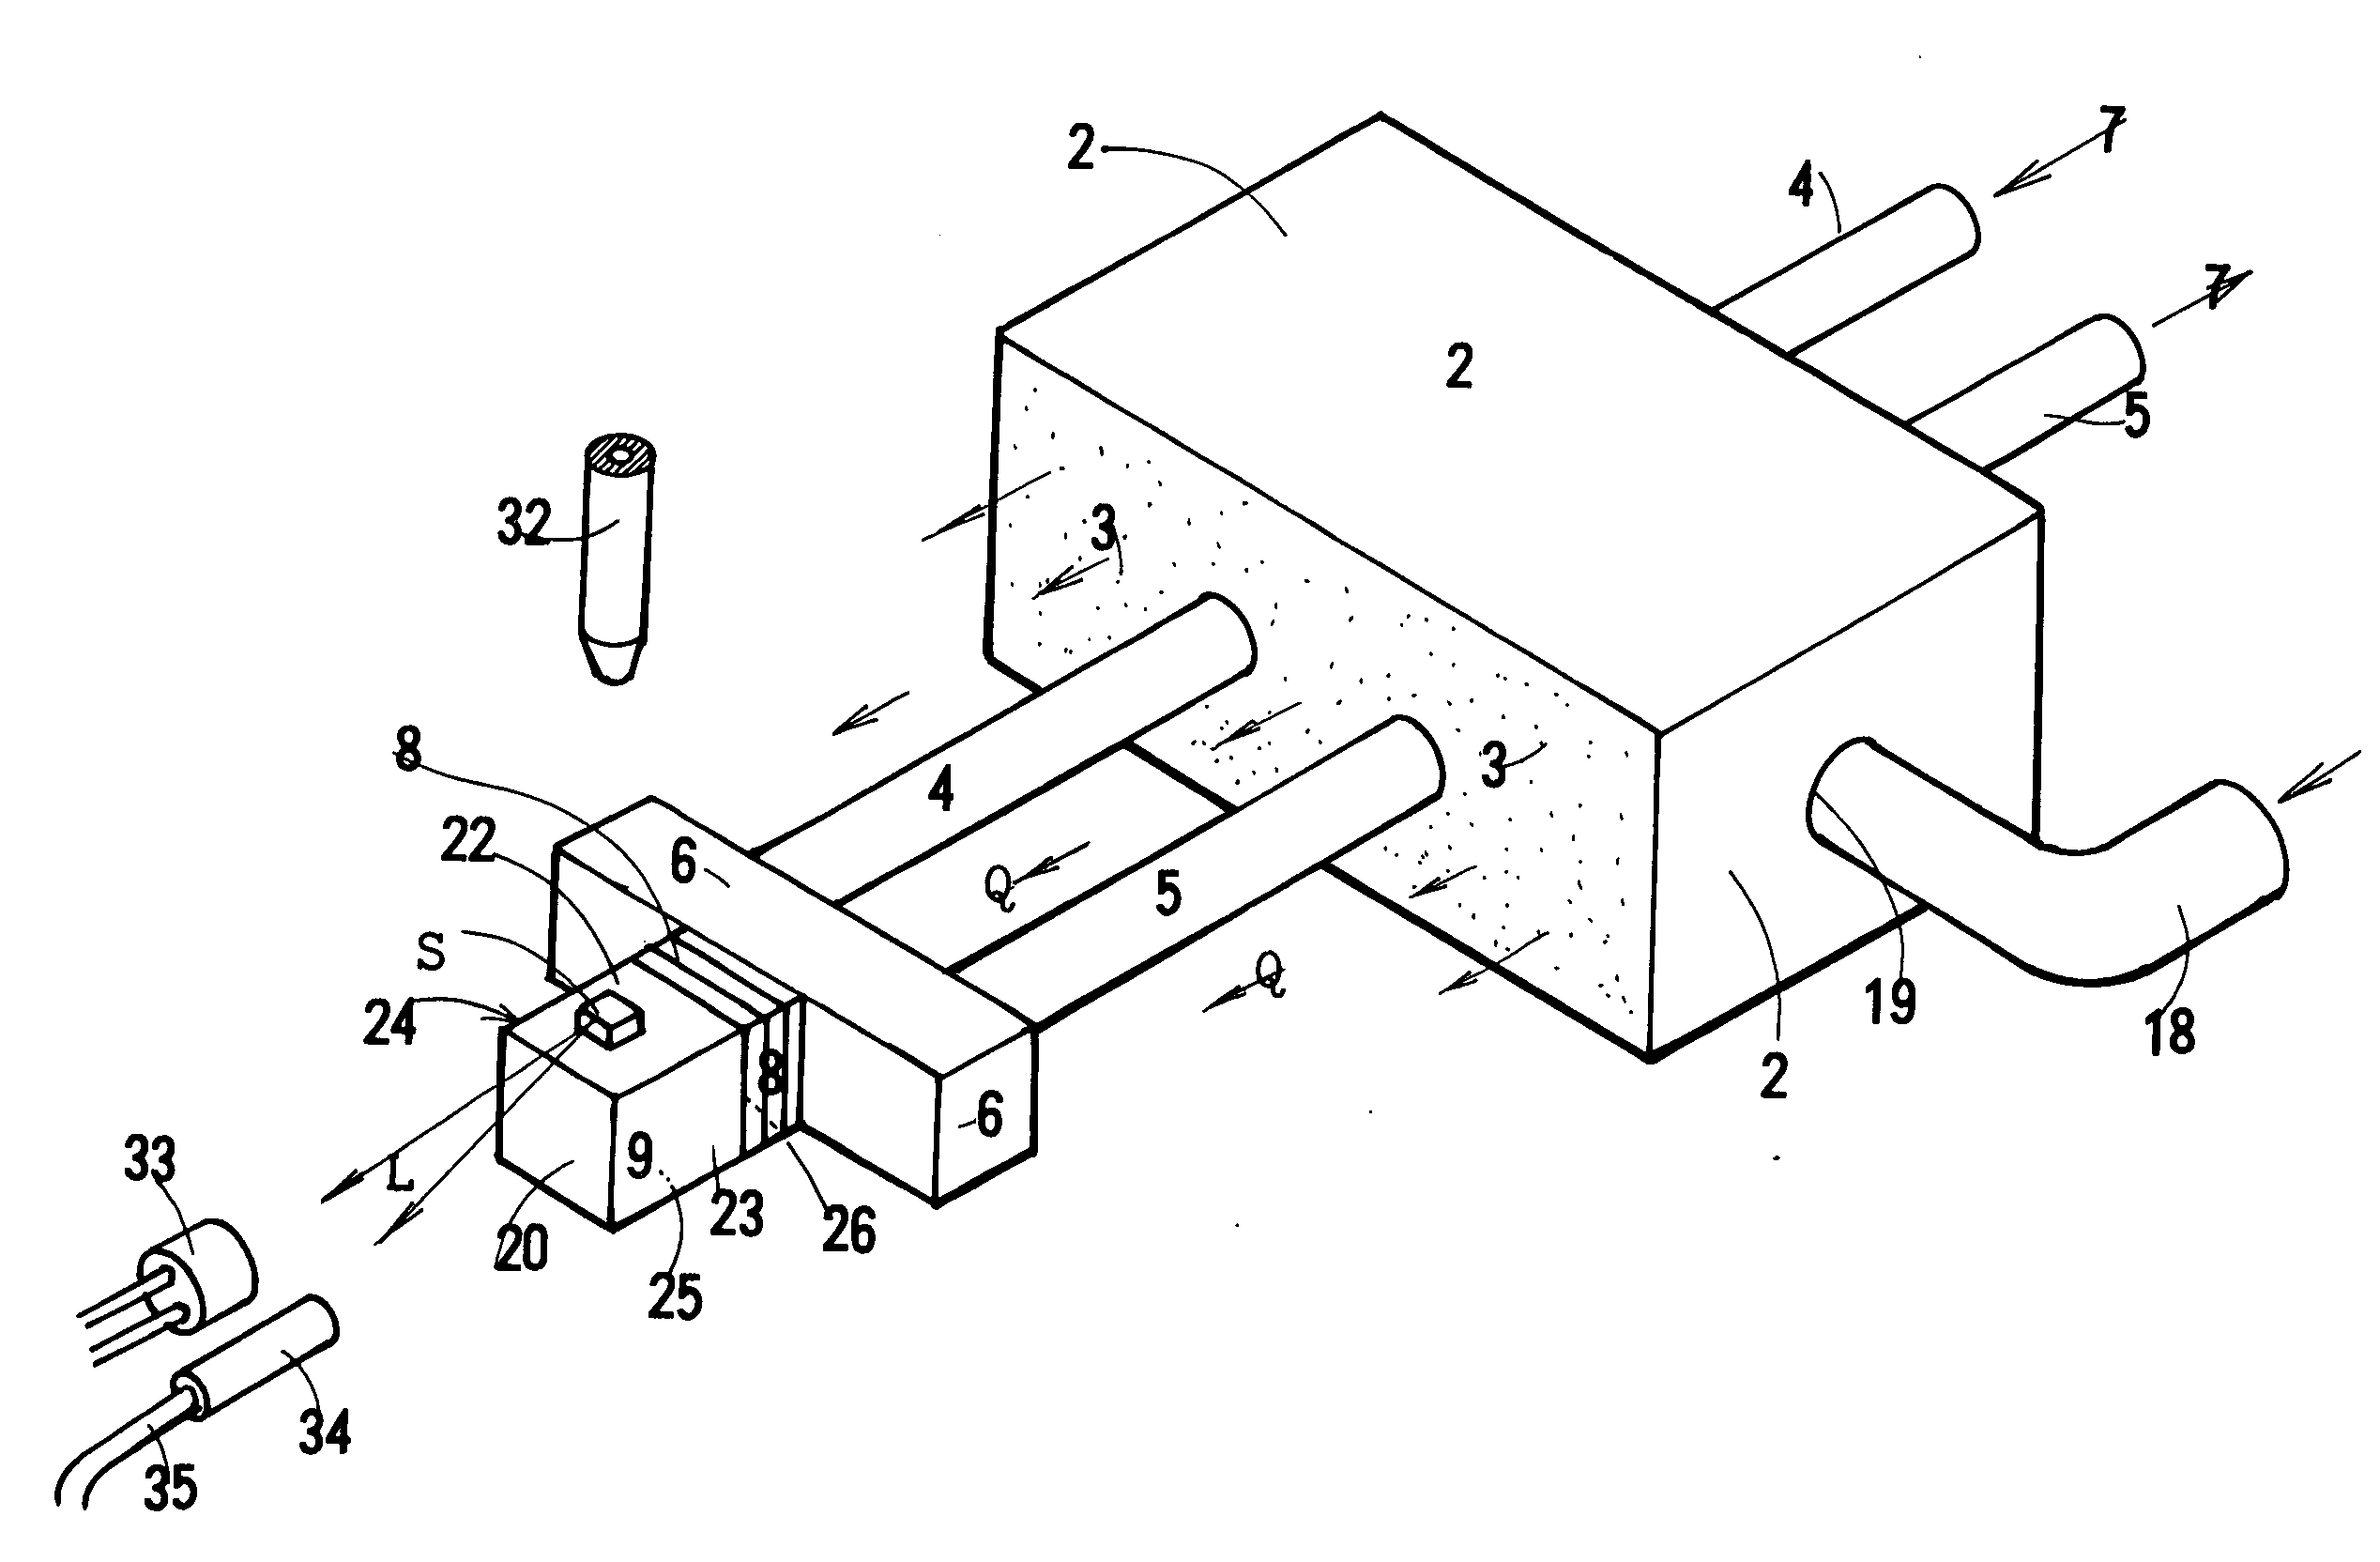 Temperature characteristic inspection device